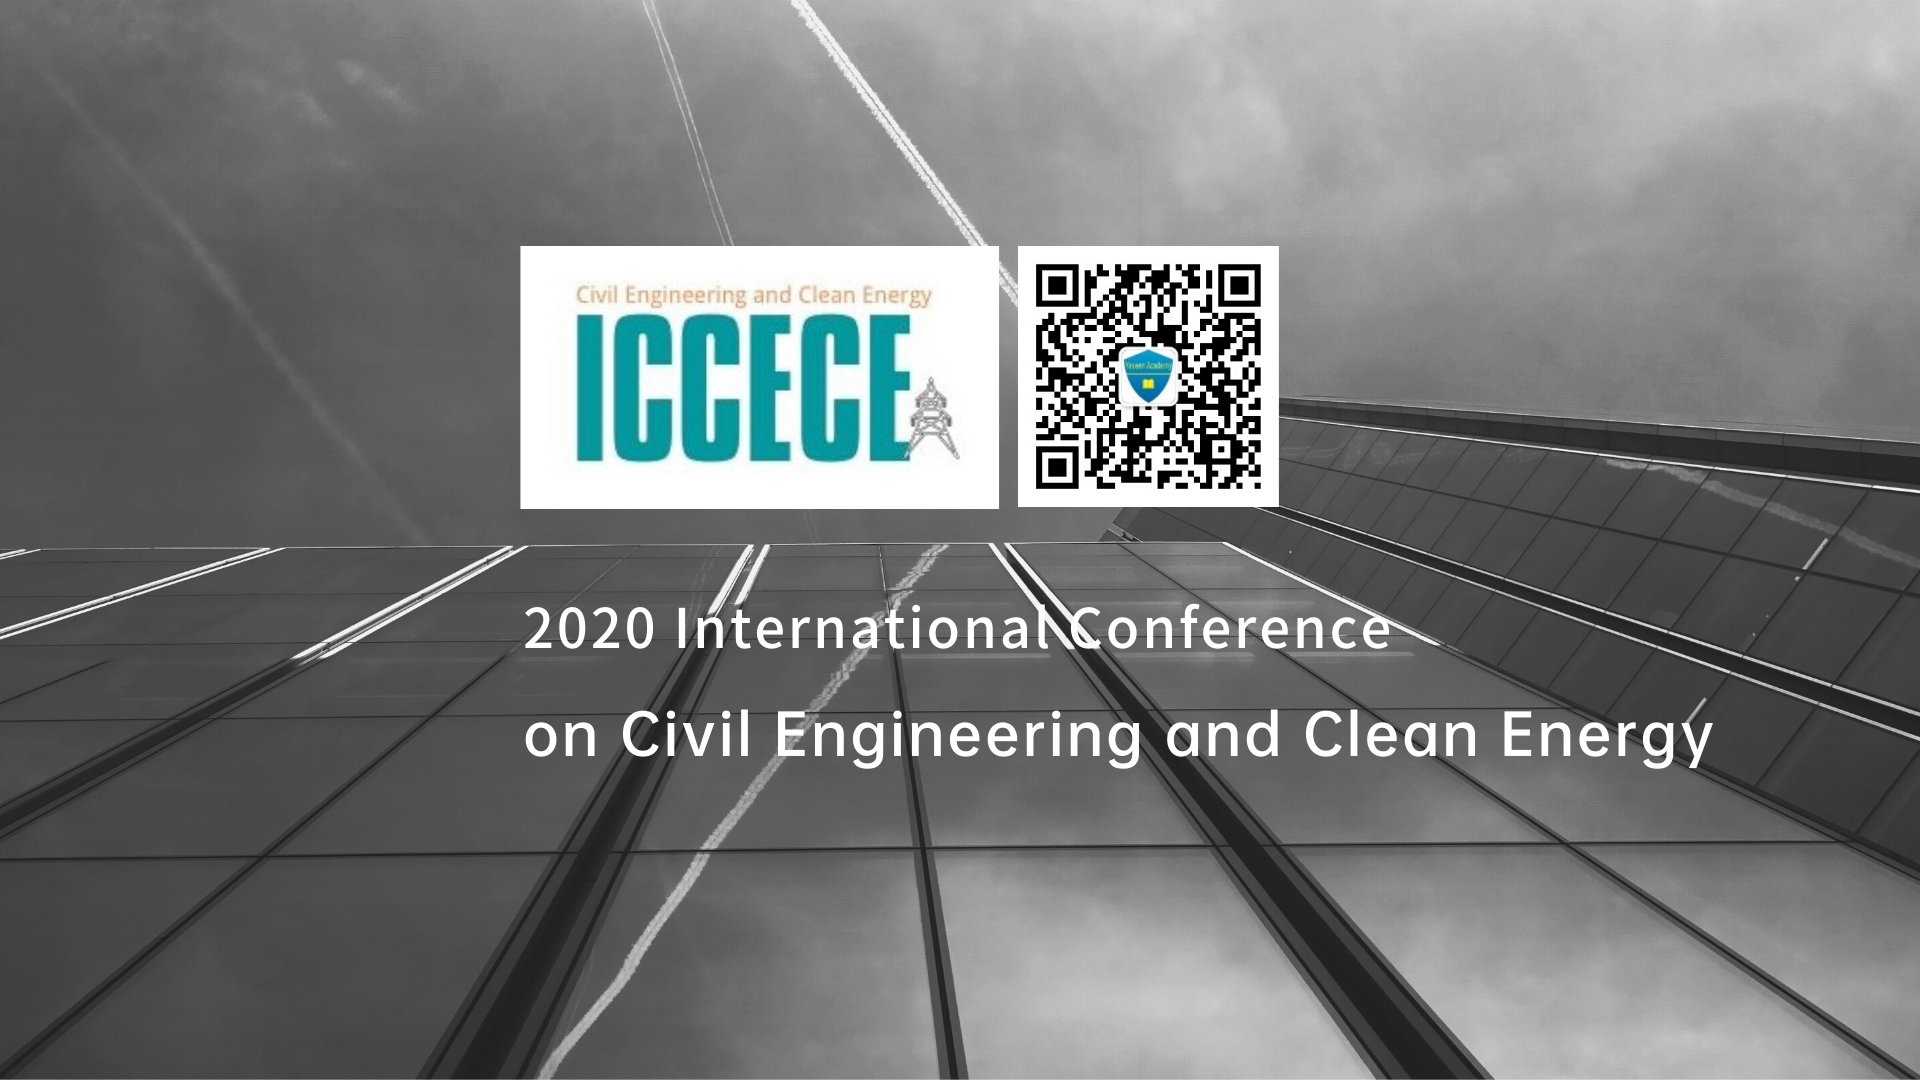 2020 International Conference on Civil Engineering and Clean Energy, Chengdu, Sichuan, China